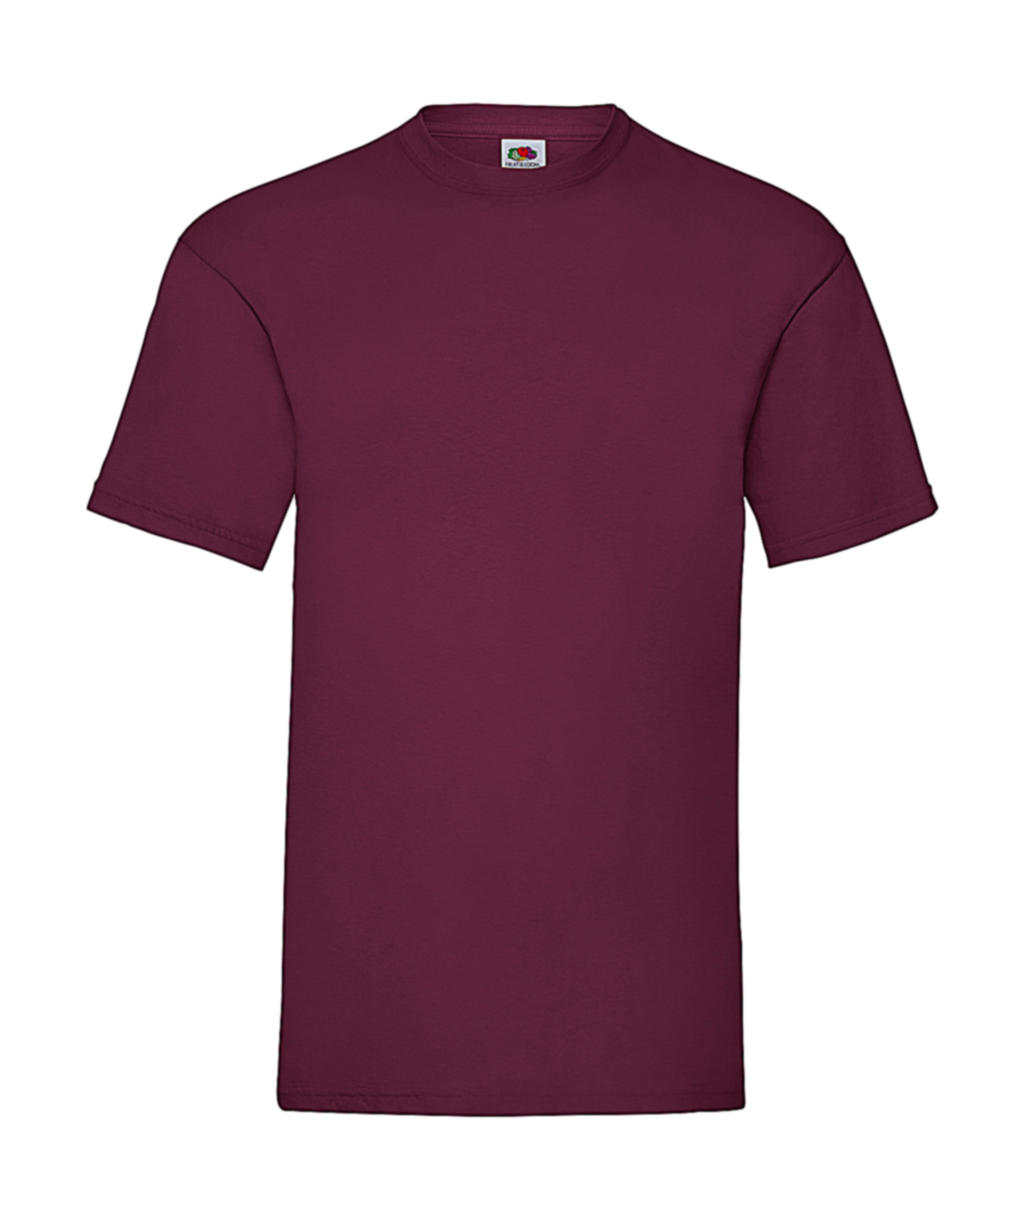  Valueweight Tee in Farbe Burgundy